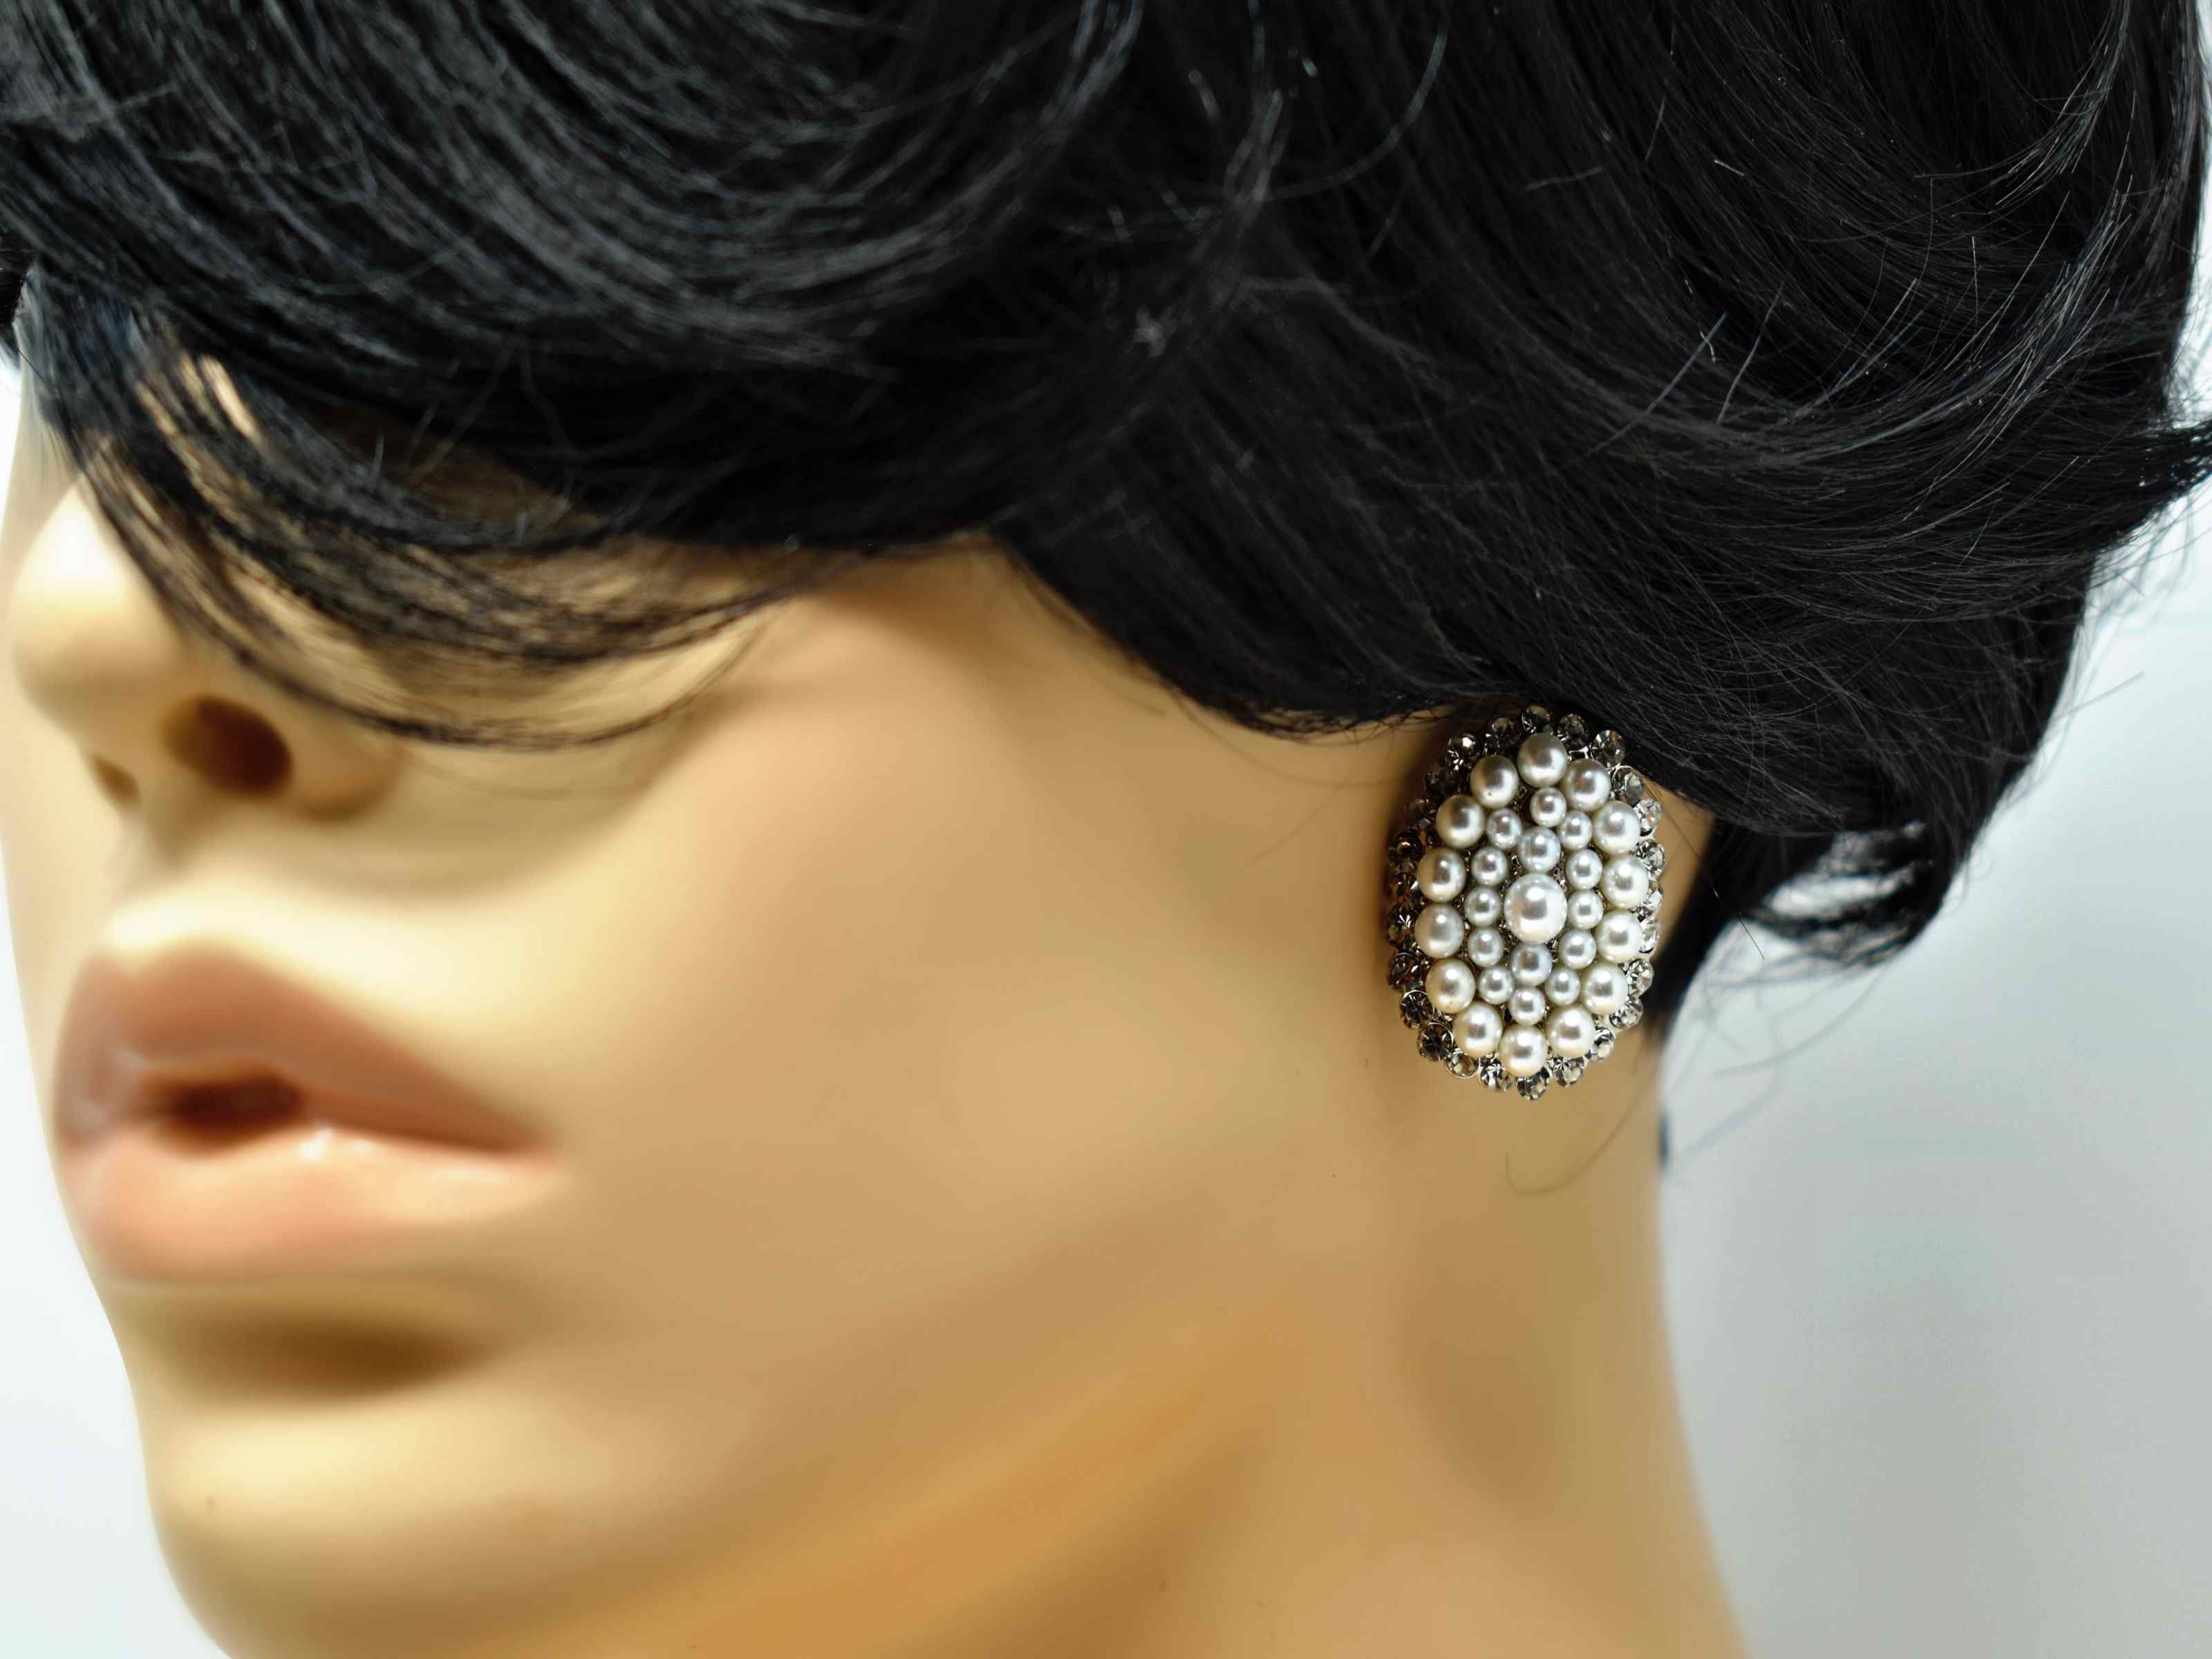 Our adorable Hosta knob earrings is the perfect addition to your wardrobe. Its oval shape is covered in pearl clusters and and has a silver tone with a push back clasp.